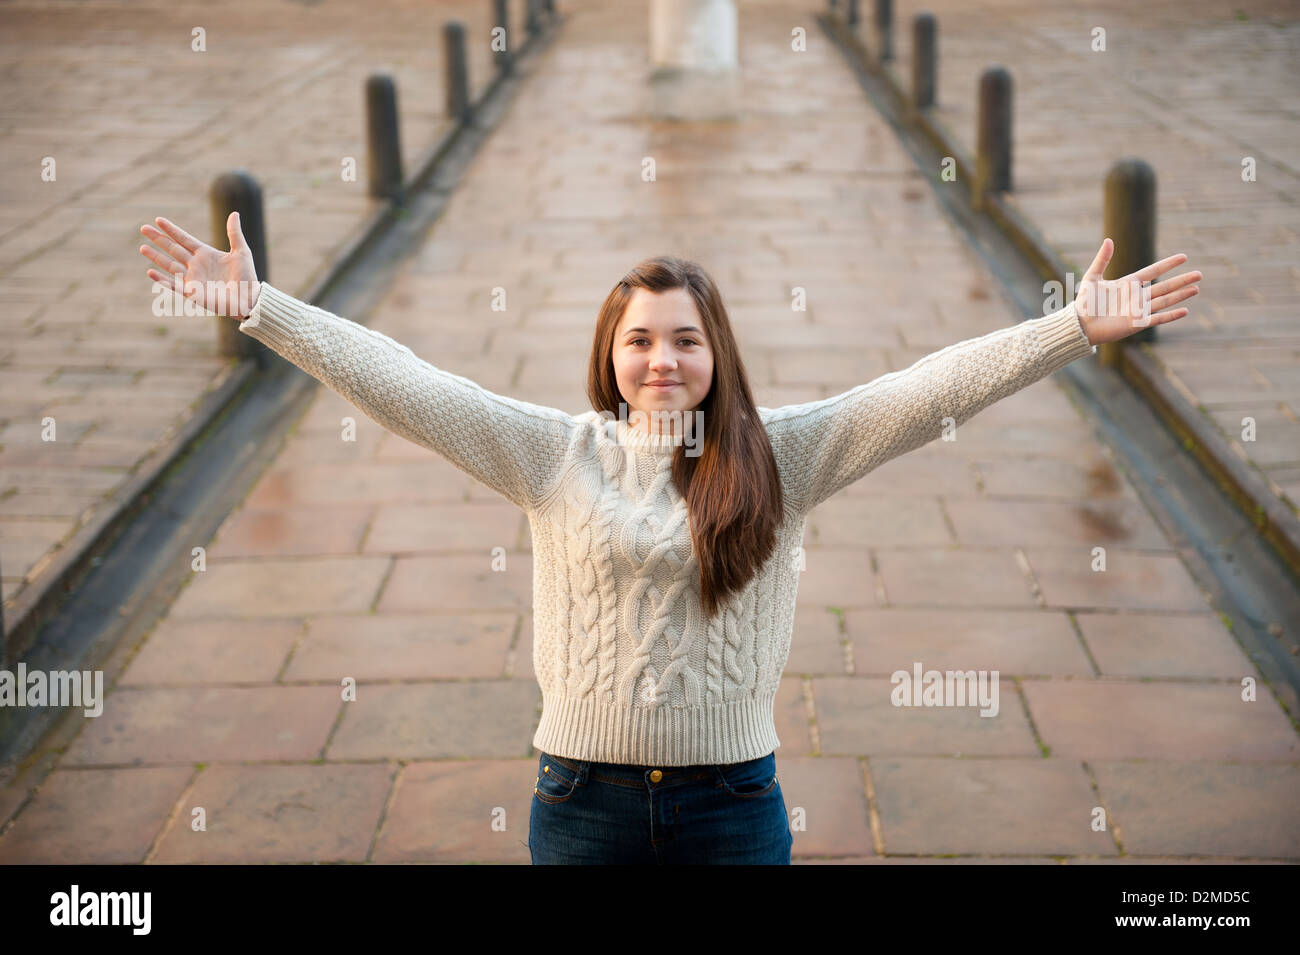 7,199 Woman With Arms Stretched Out Stock Photos, High-Res Pictures, and  Images - Getty Images